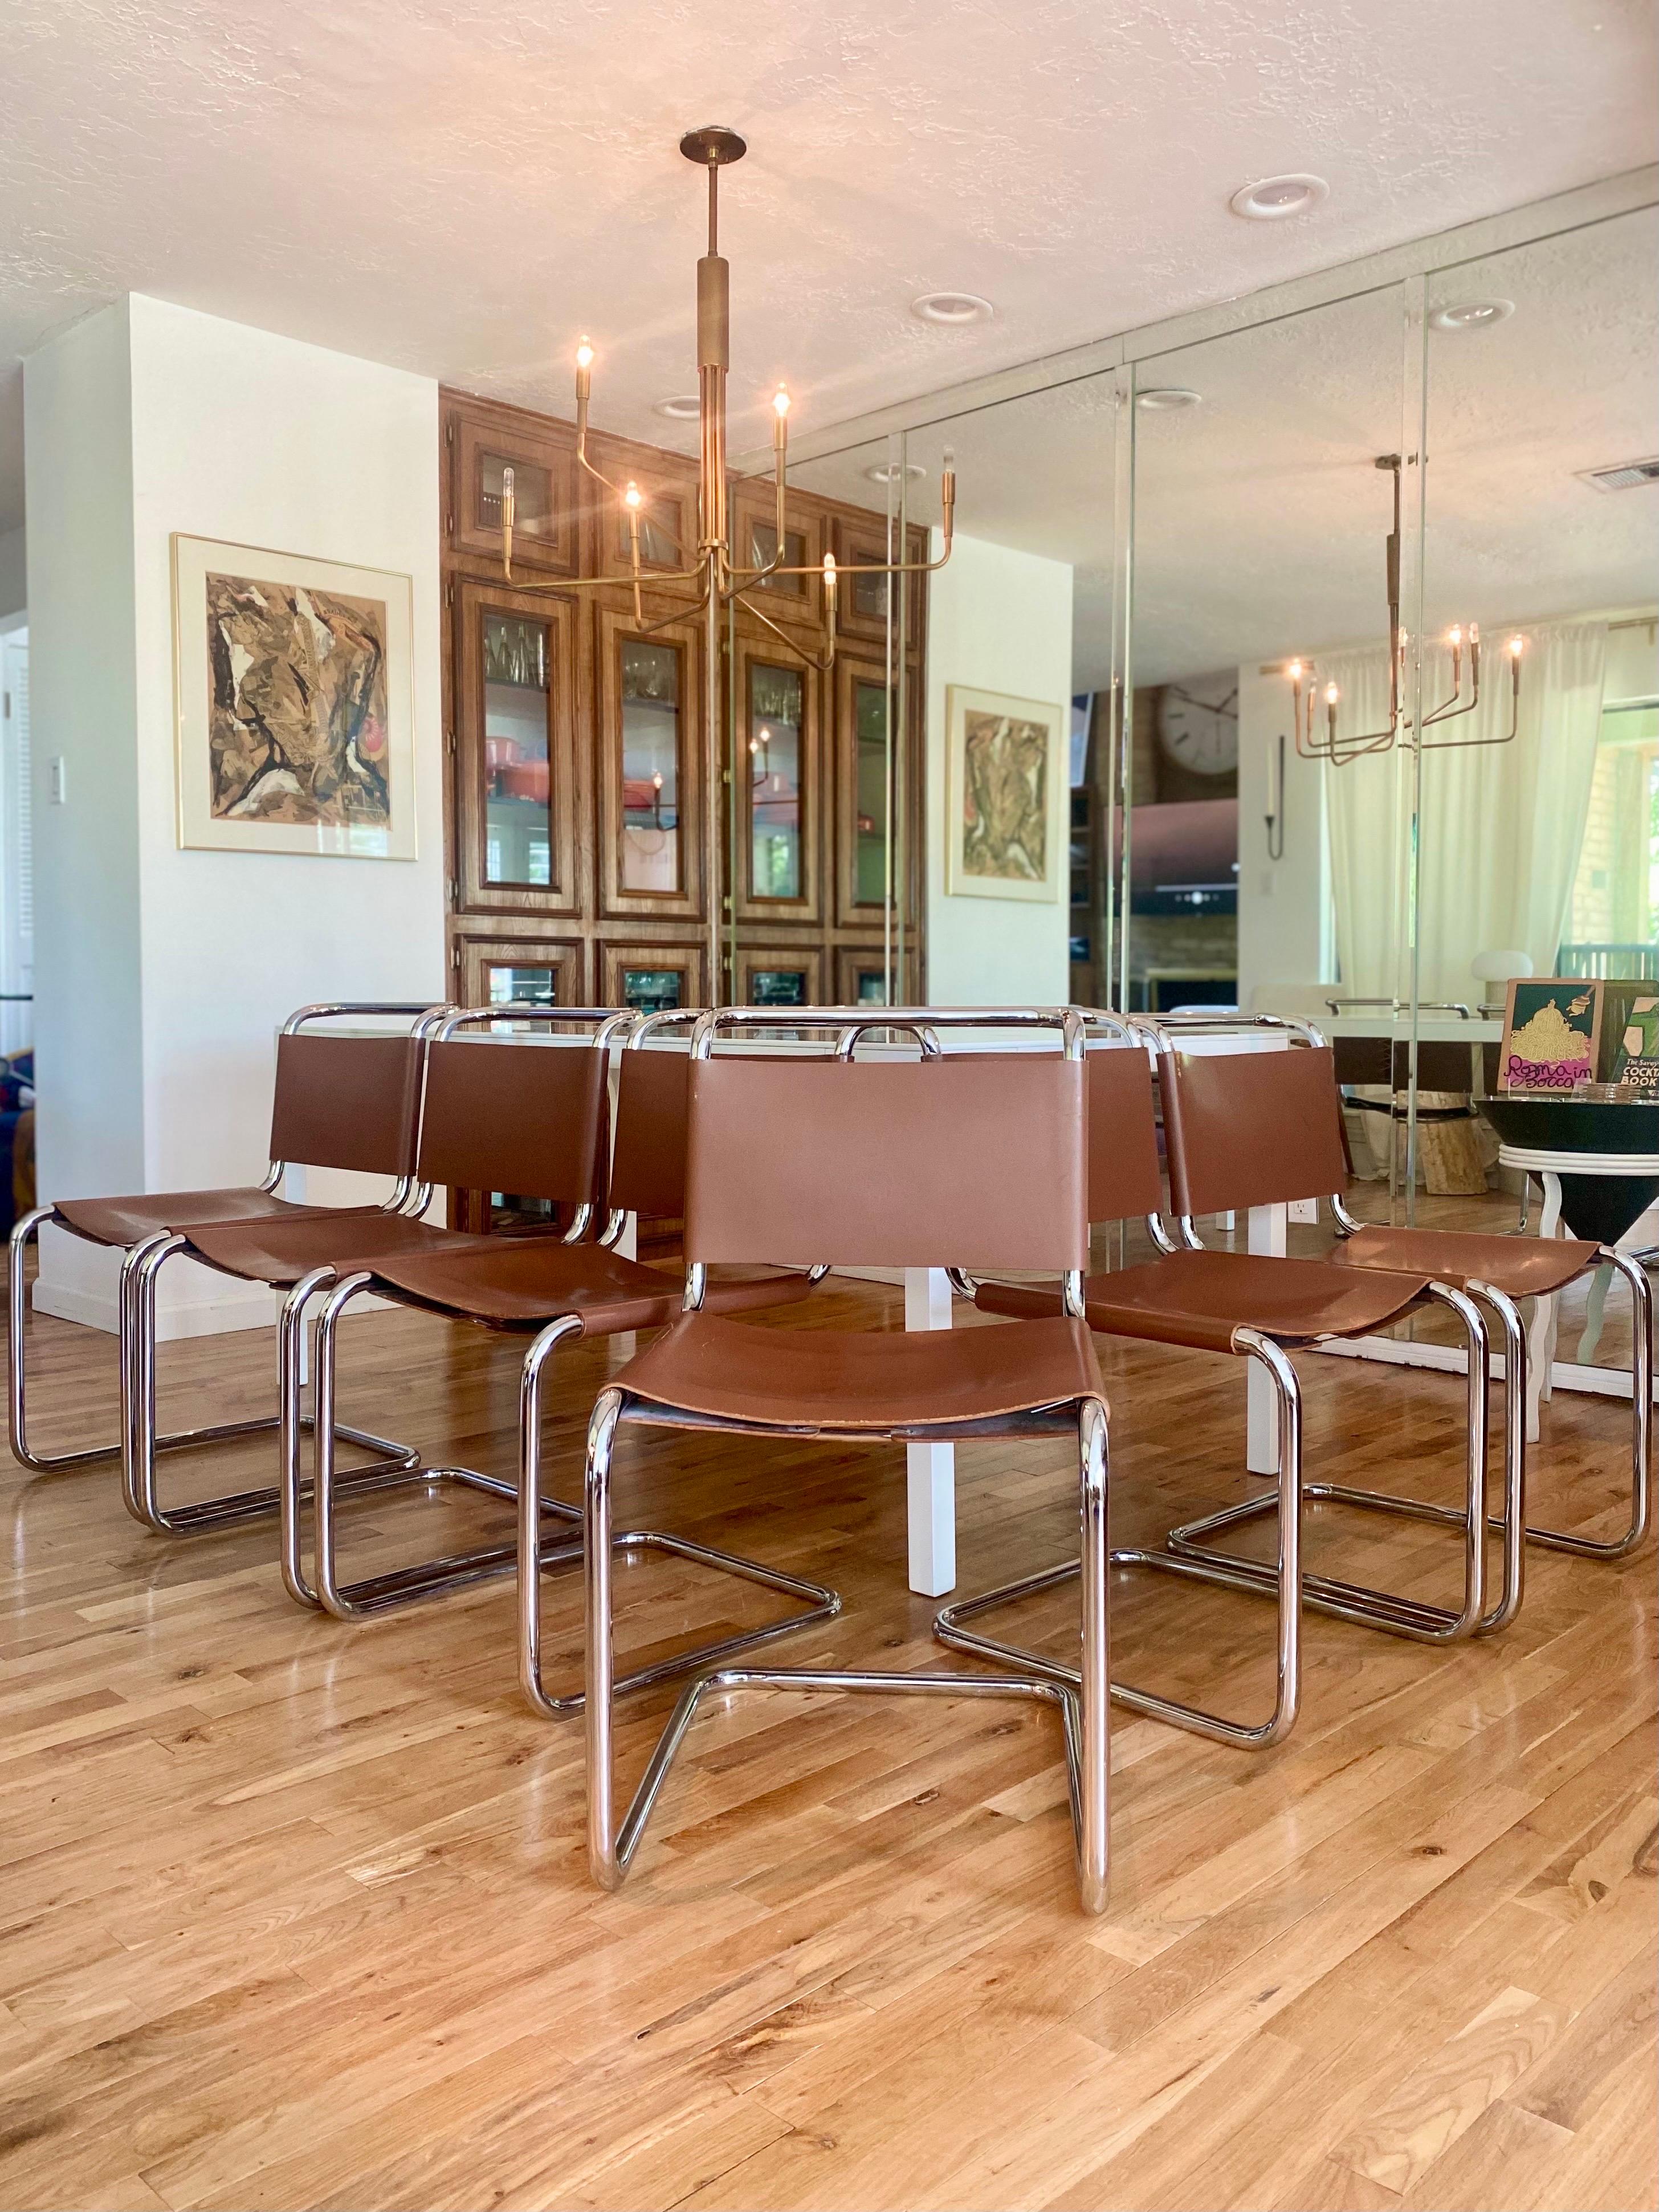 Set of six iconic Spoleto/B33 dining chairs designed by Marcel Breuer for Knoll, c.1970s. Cognac leather seats and backs wrap around the cantilevered chrome frames with corset ties. A piece of Bauhaus design history, this set is